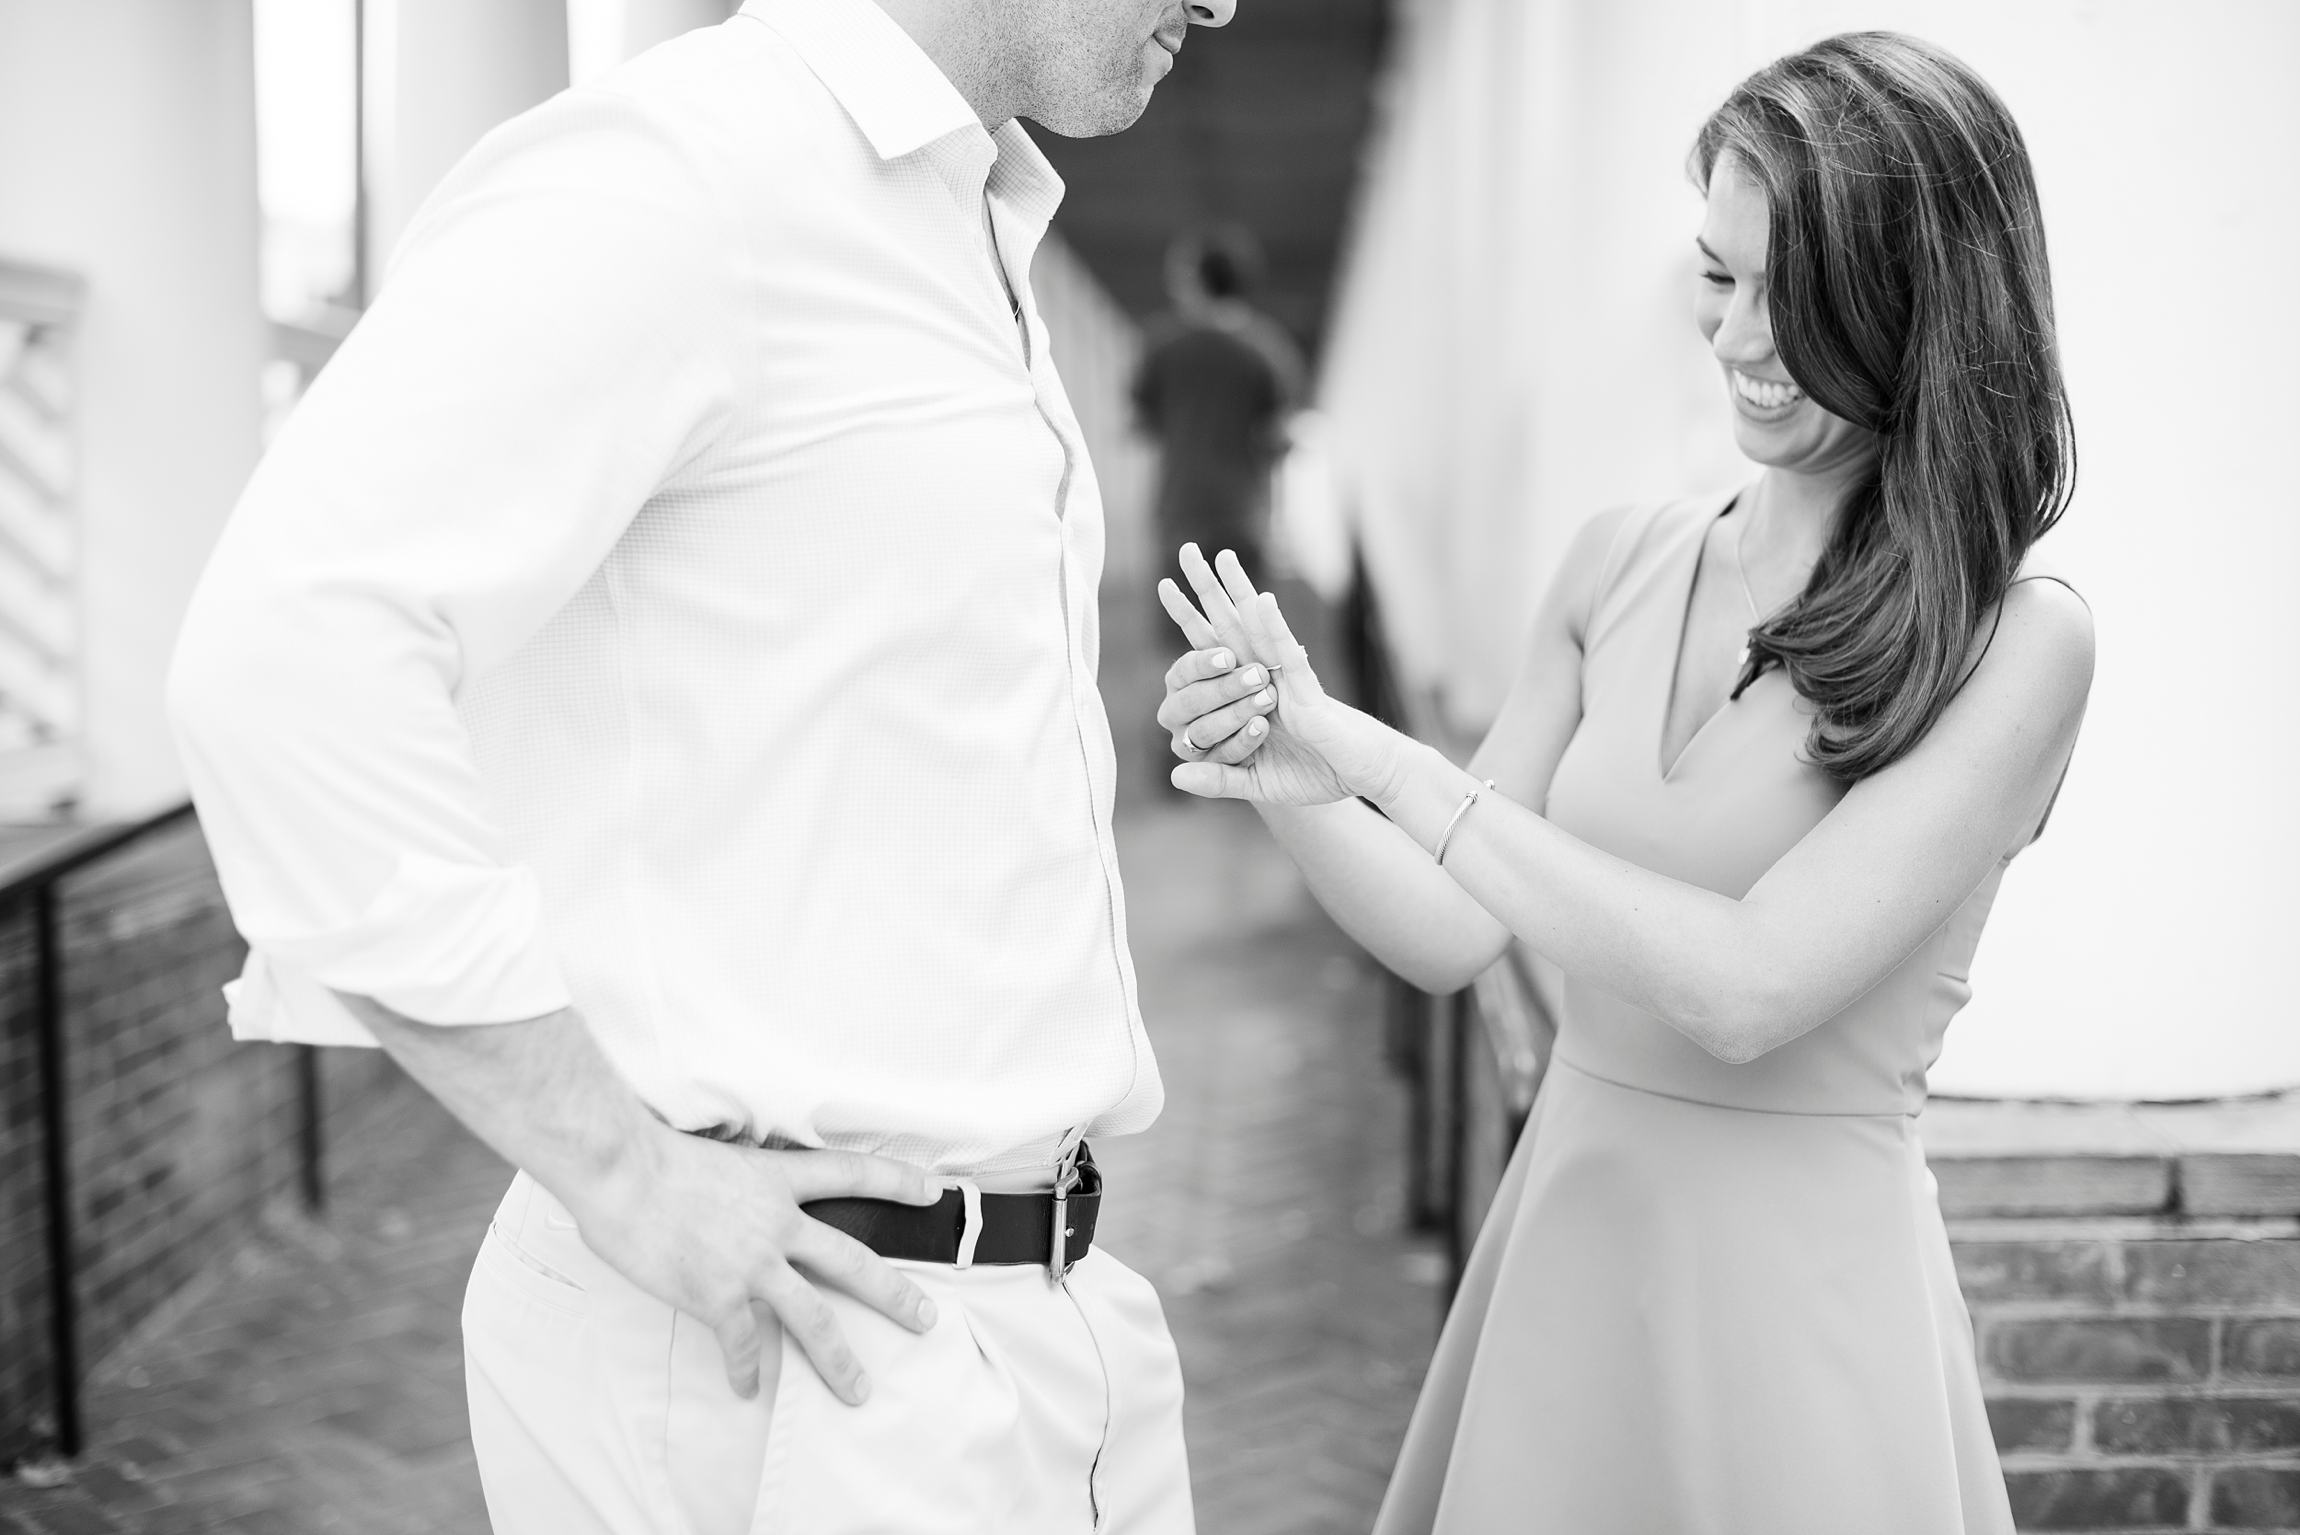 tips-for-photographing-a-proposal-charlottesville-wedding-photographer